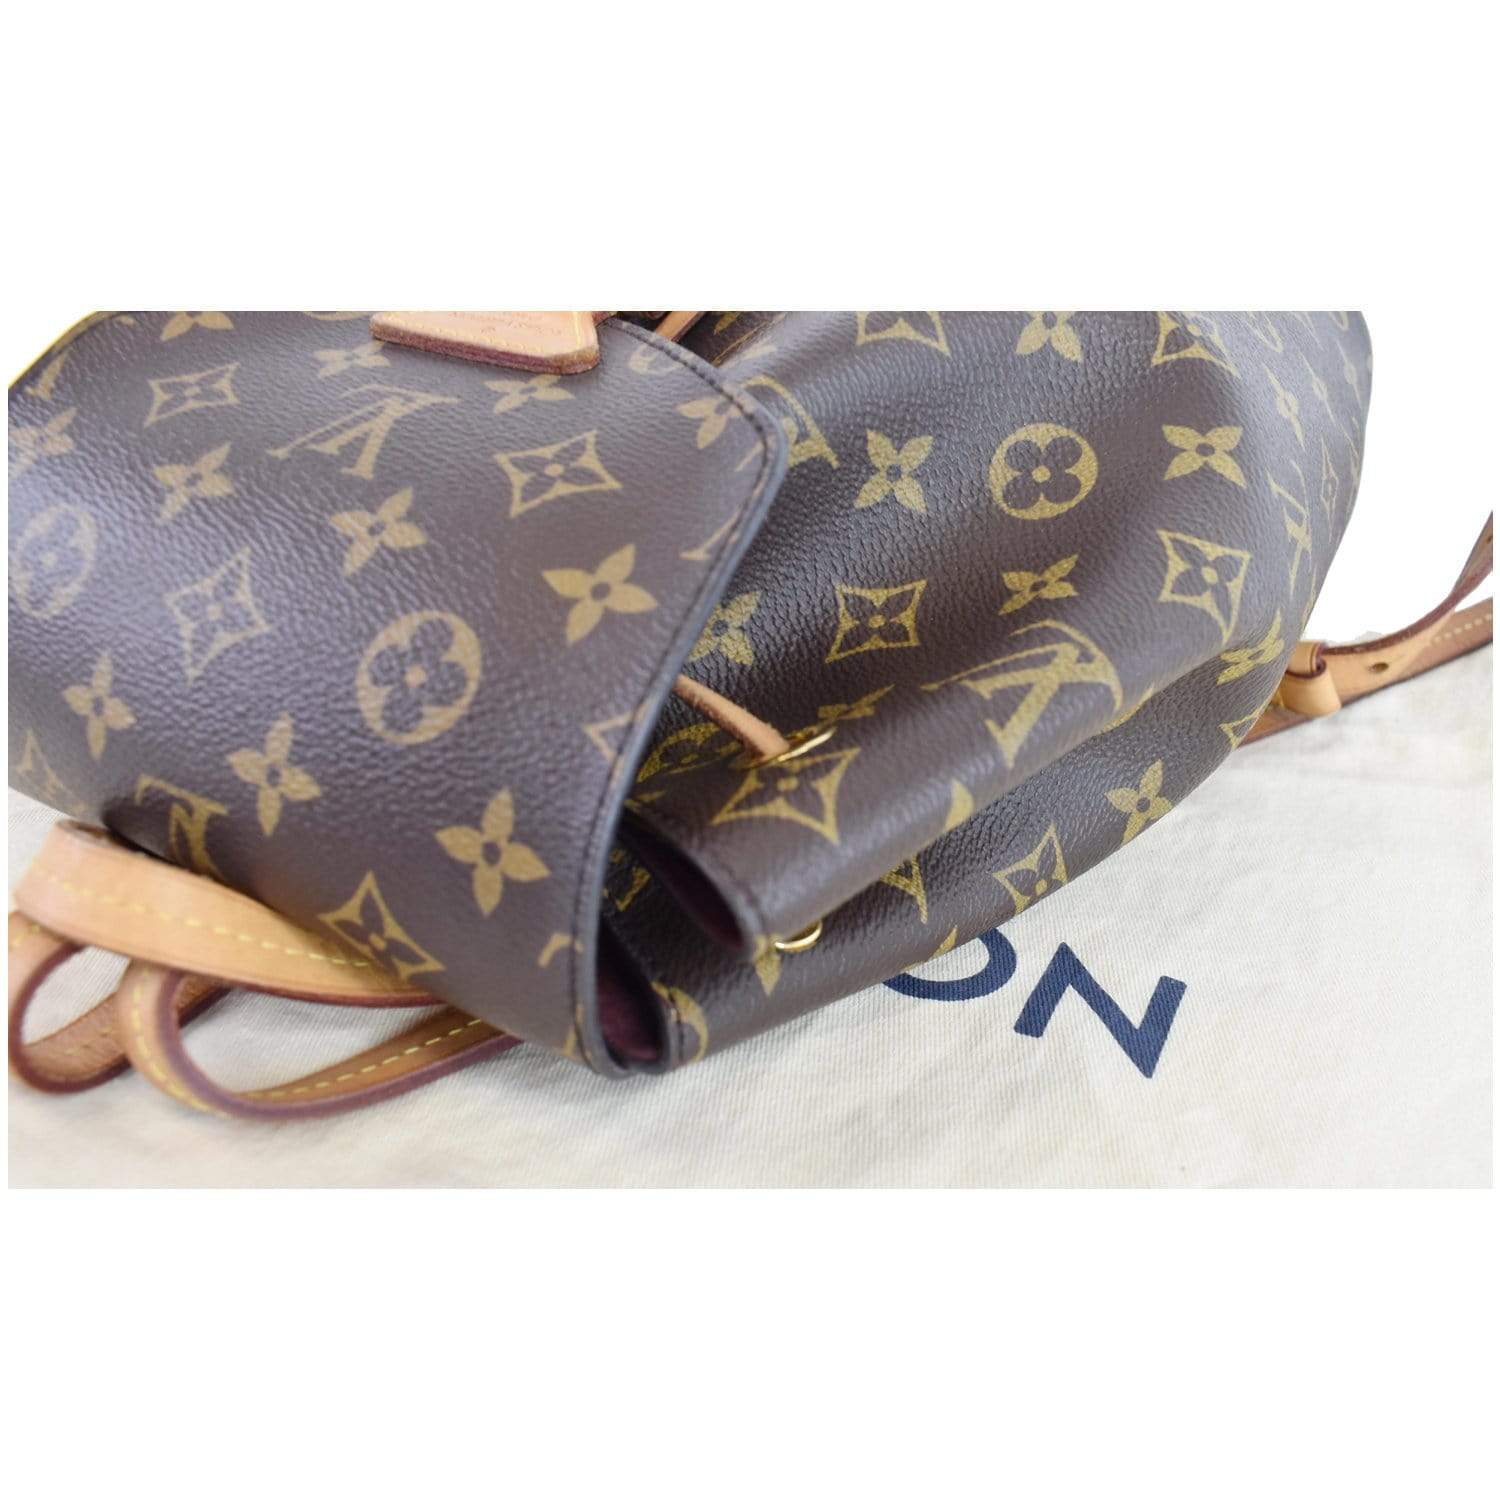 Louis Vuitton Montsouris Canvas Backpack Bag (pre-owned) in Gray